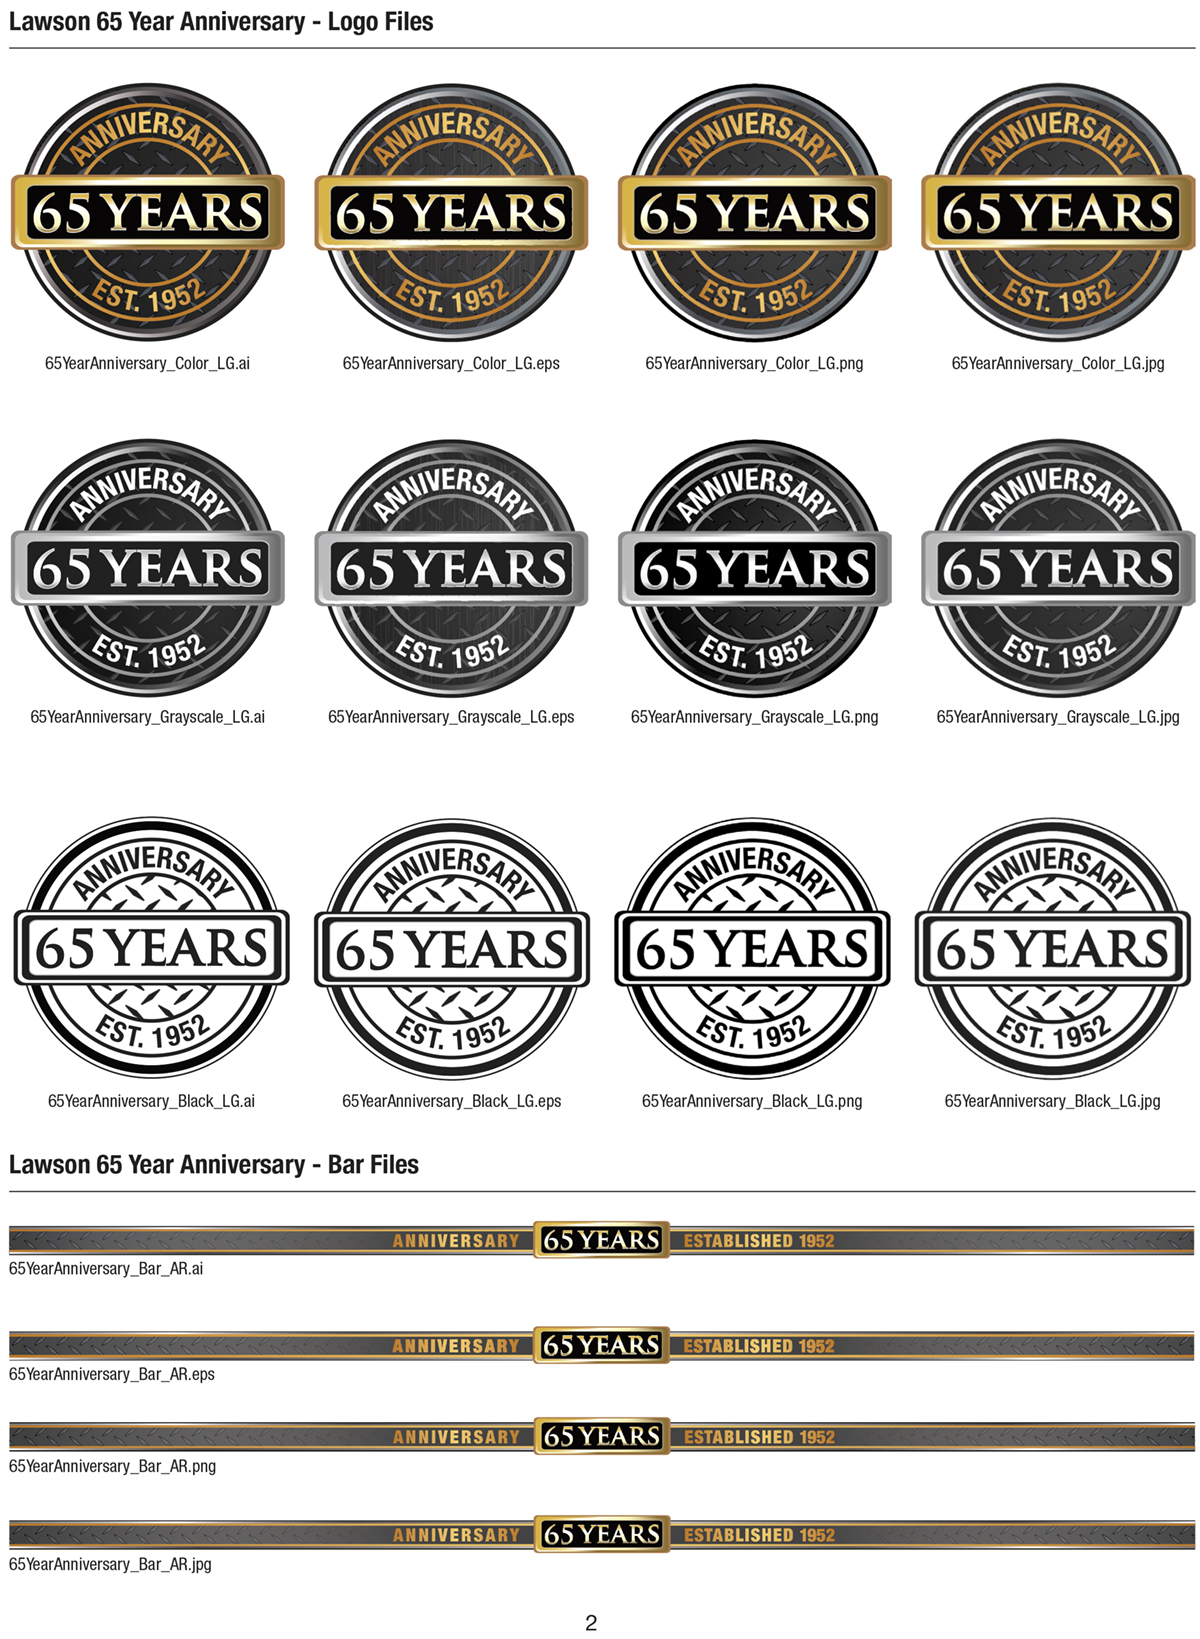 Lawson Products 65 Year Anniversary Graphics Style Guide